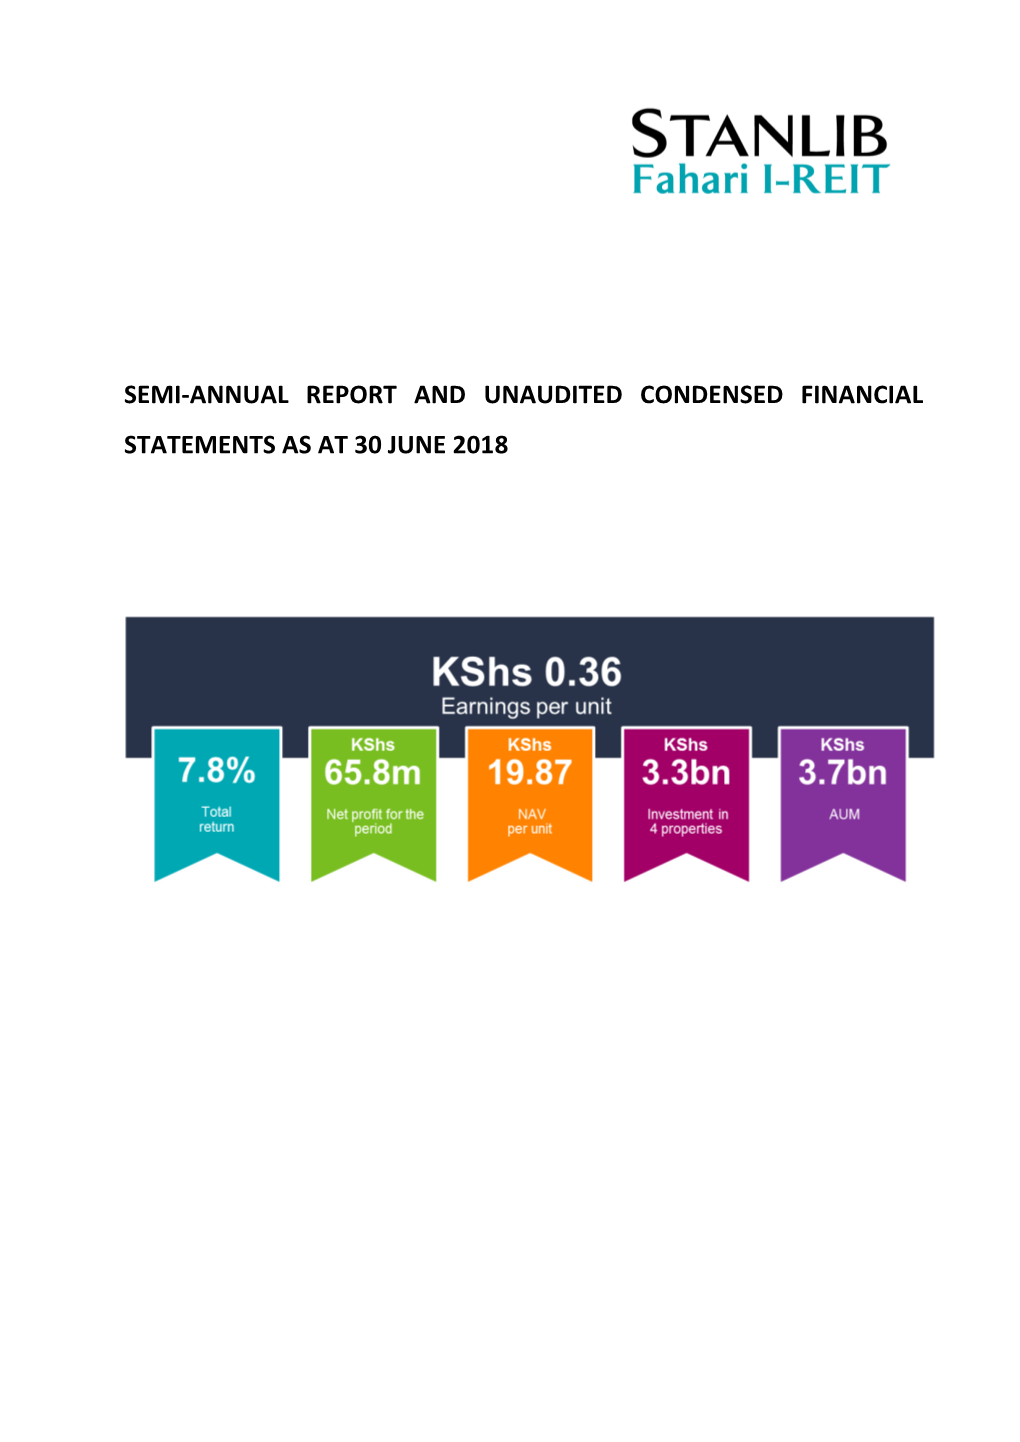 Semi-Annual Report and Unaudited Condensed Financial Statements As at 30 June 2018